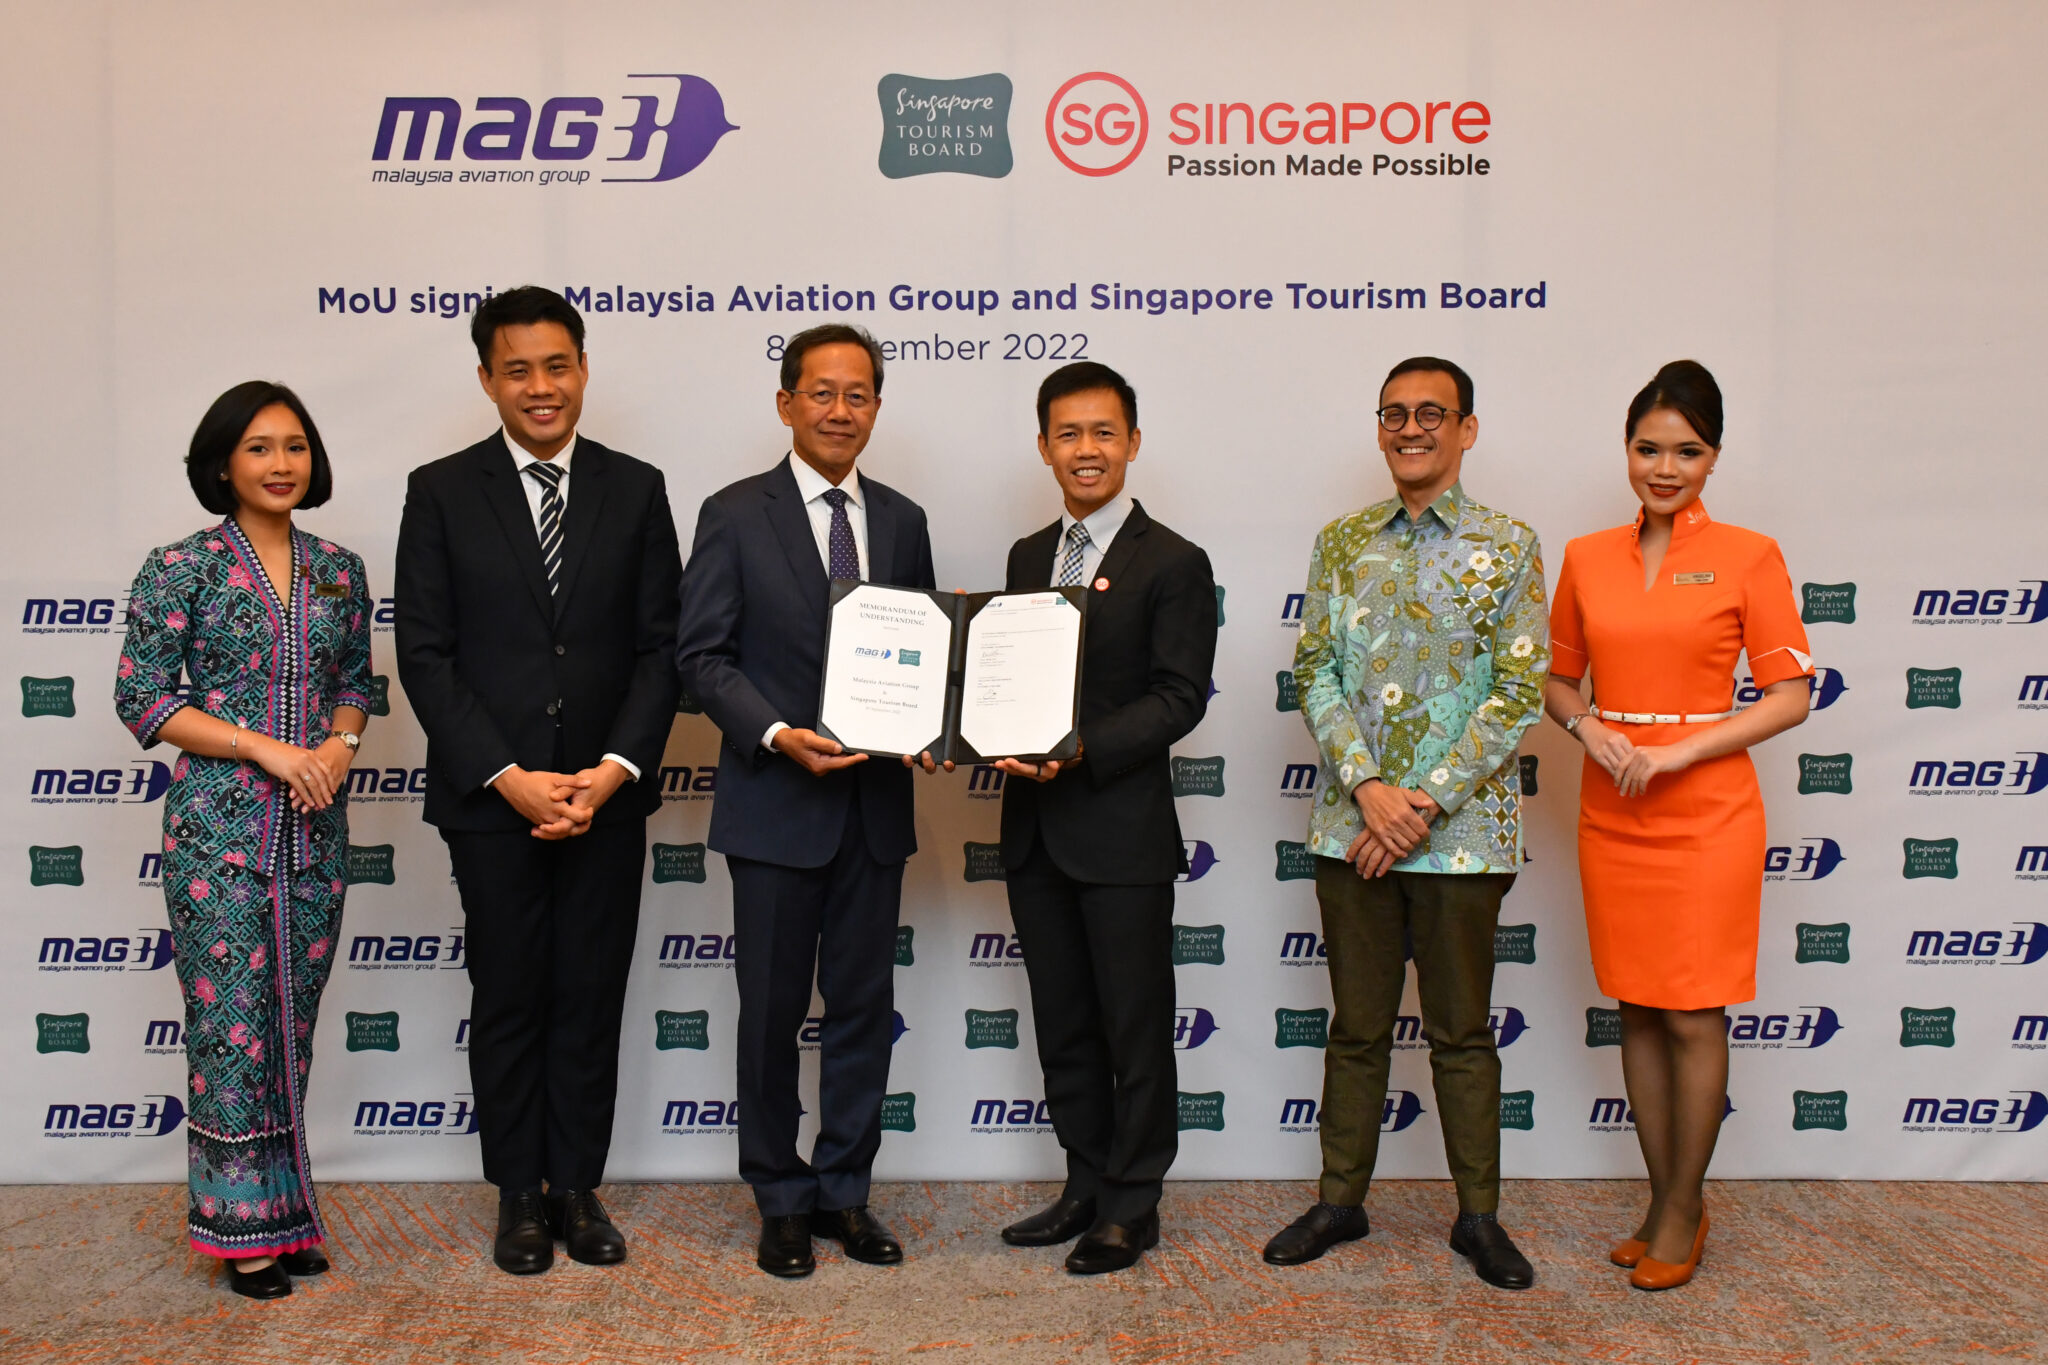 mag-partners-with-stb-to-promote-singapore